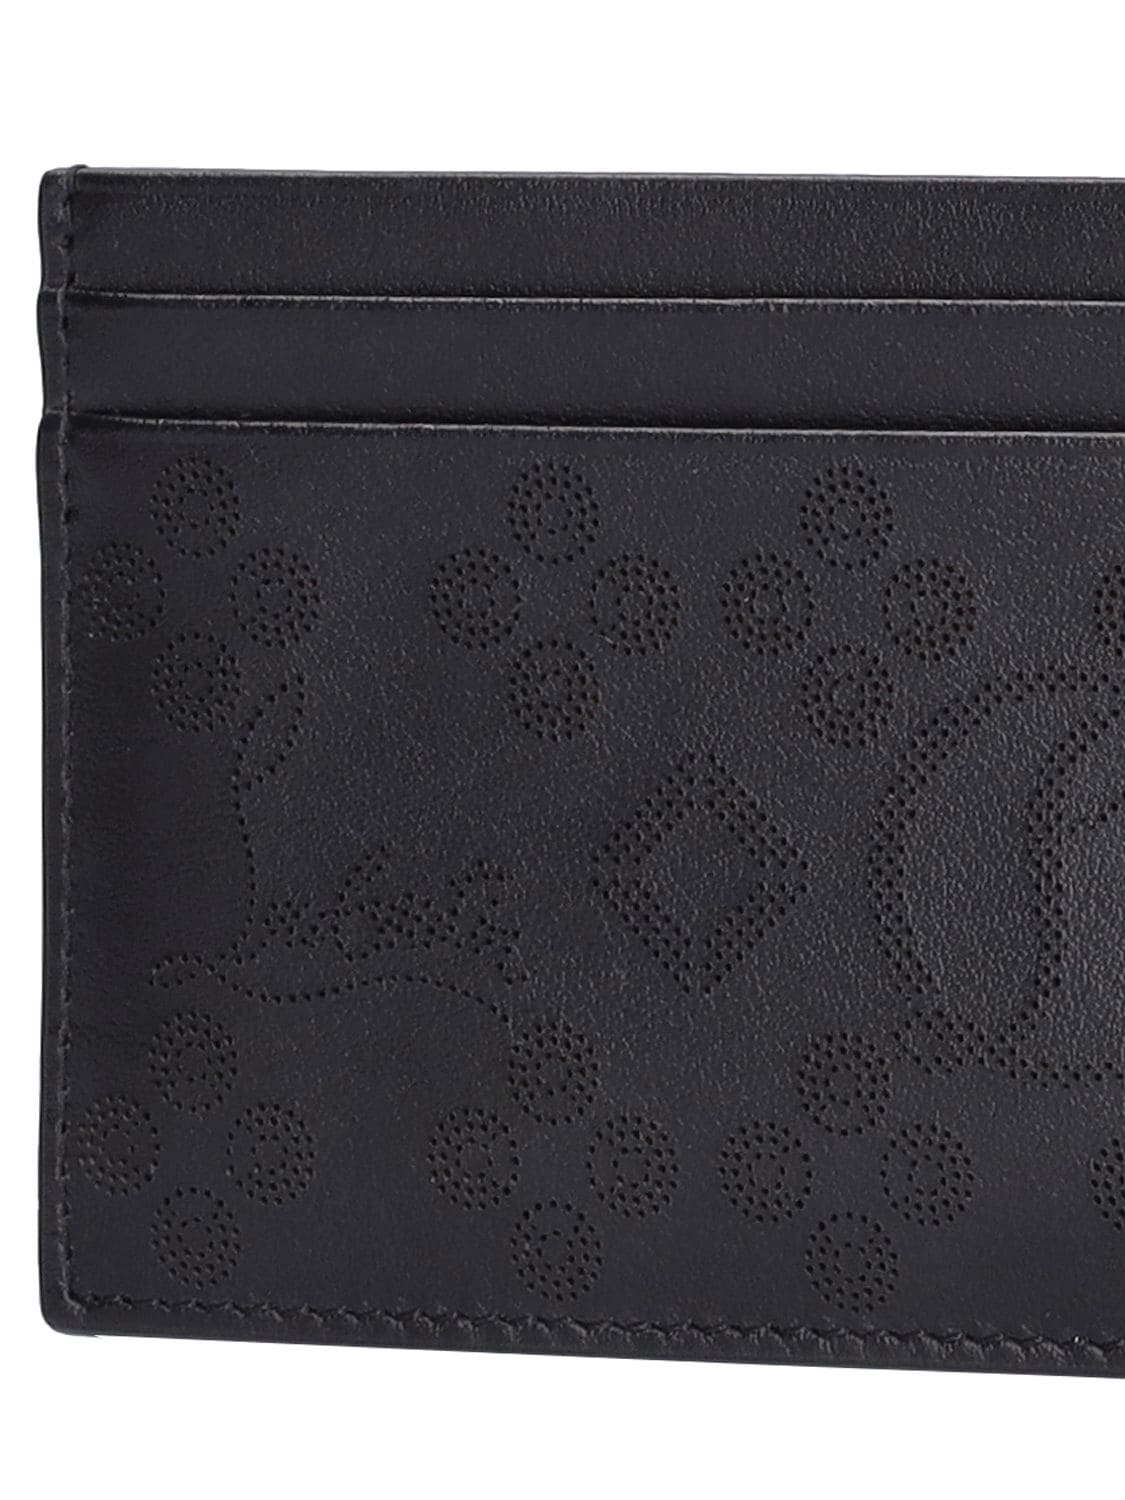 Shop Christian Louboutin W Kios Perforated Leather Card Holder In Black